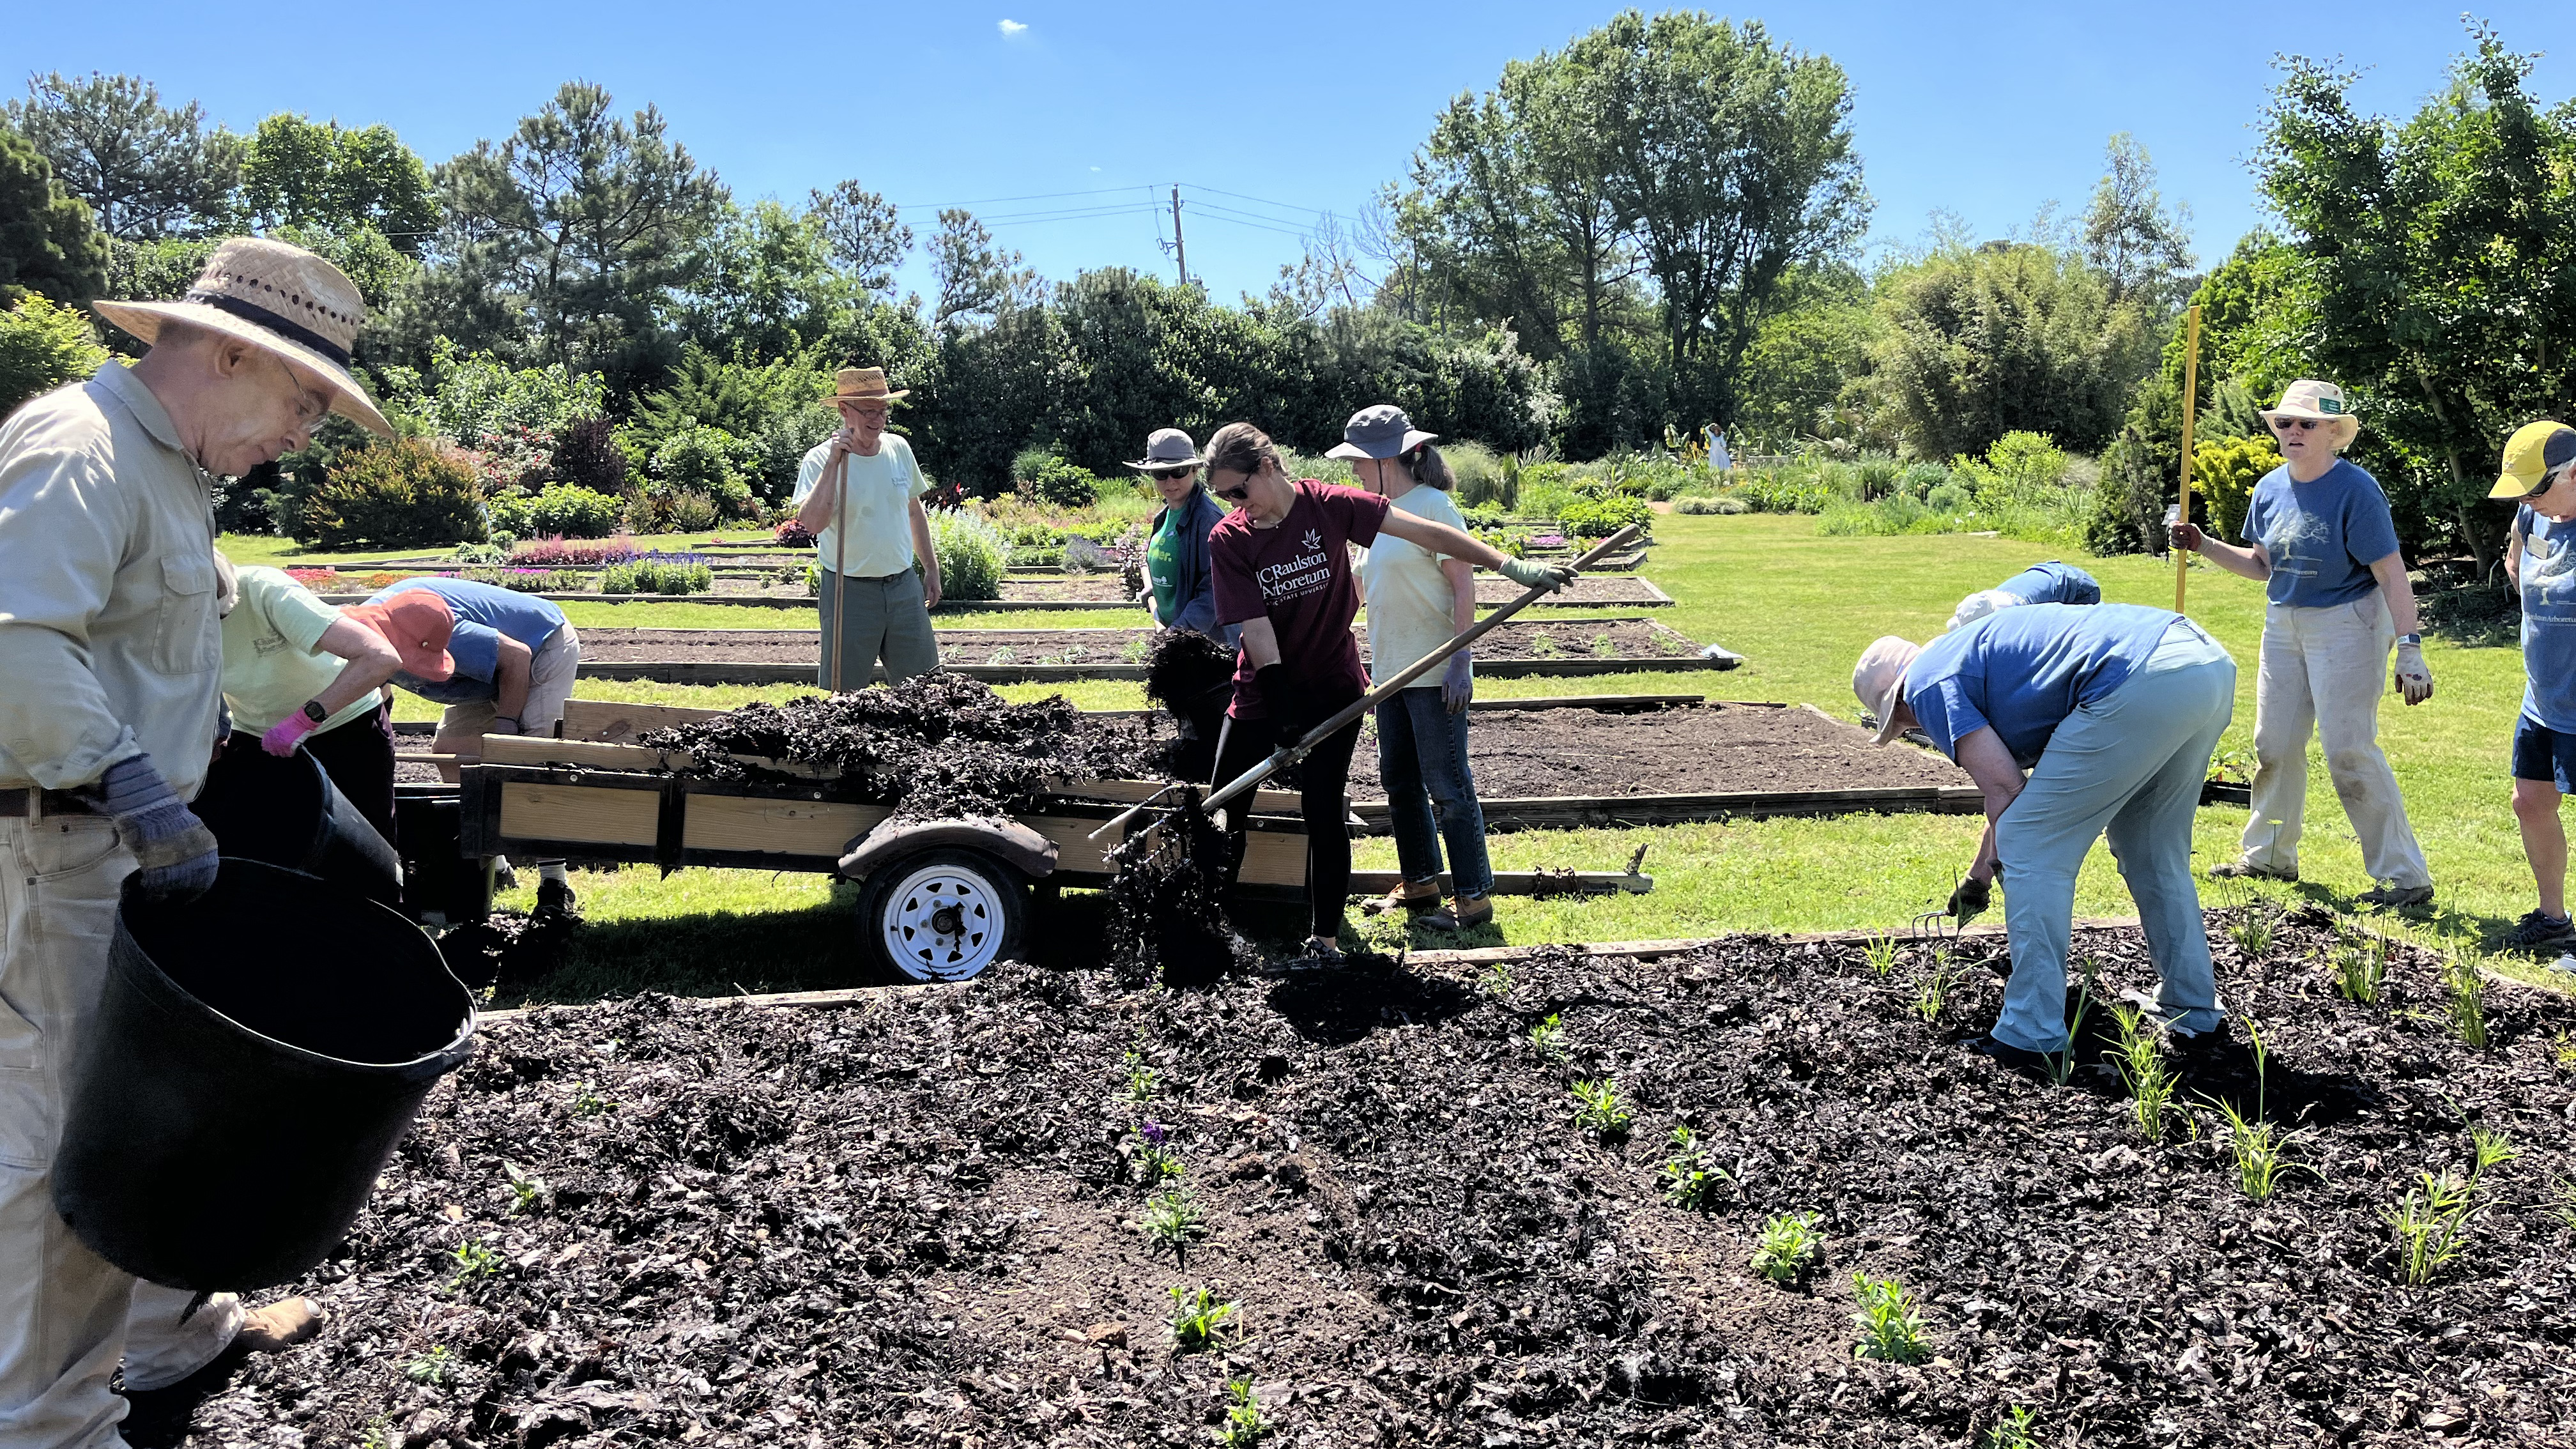 Interns and volunteers preparing the trial beds at the JCRA